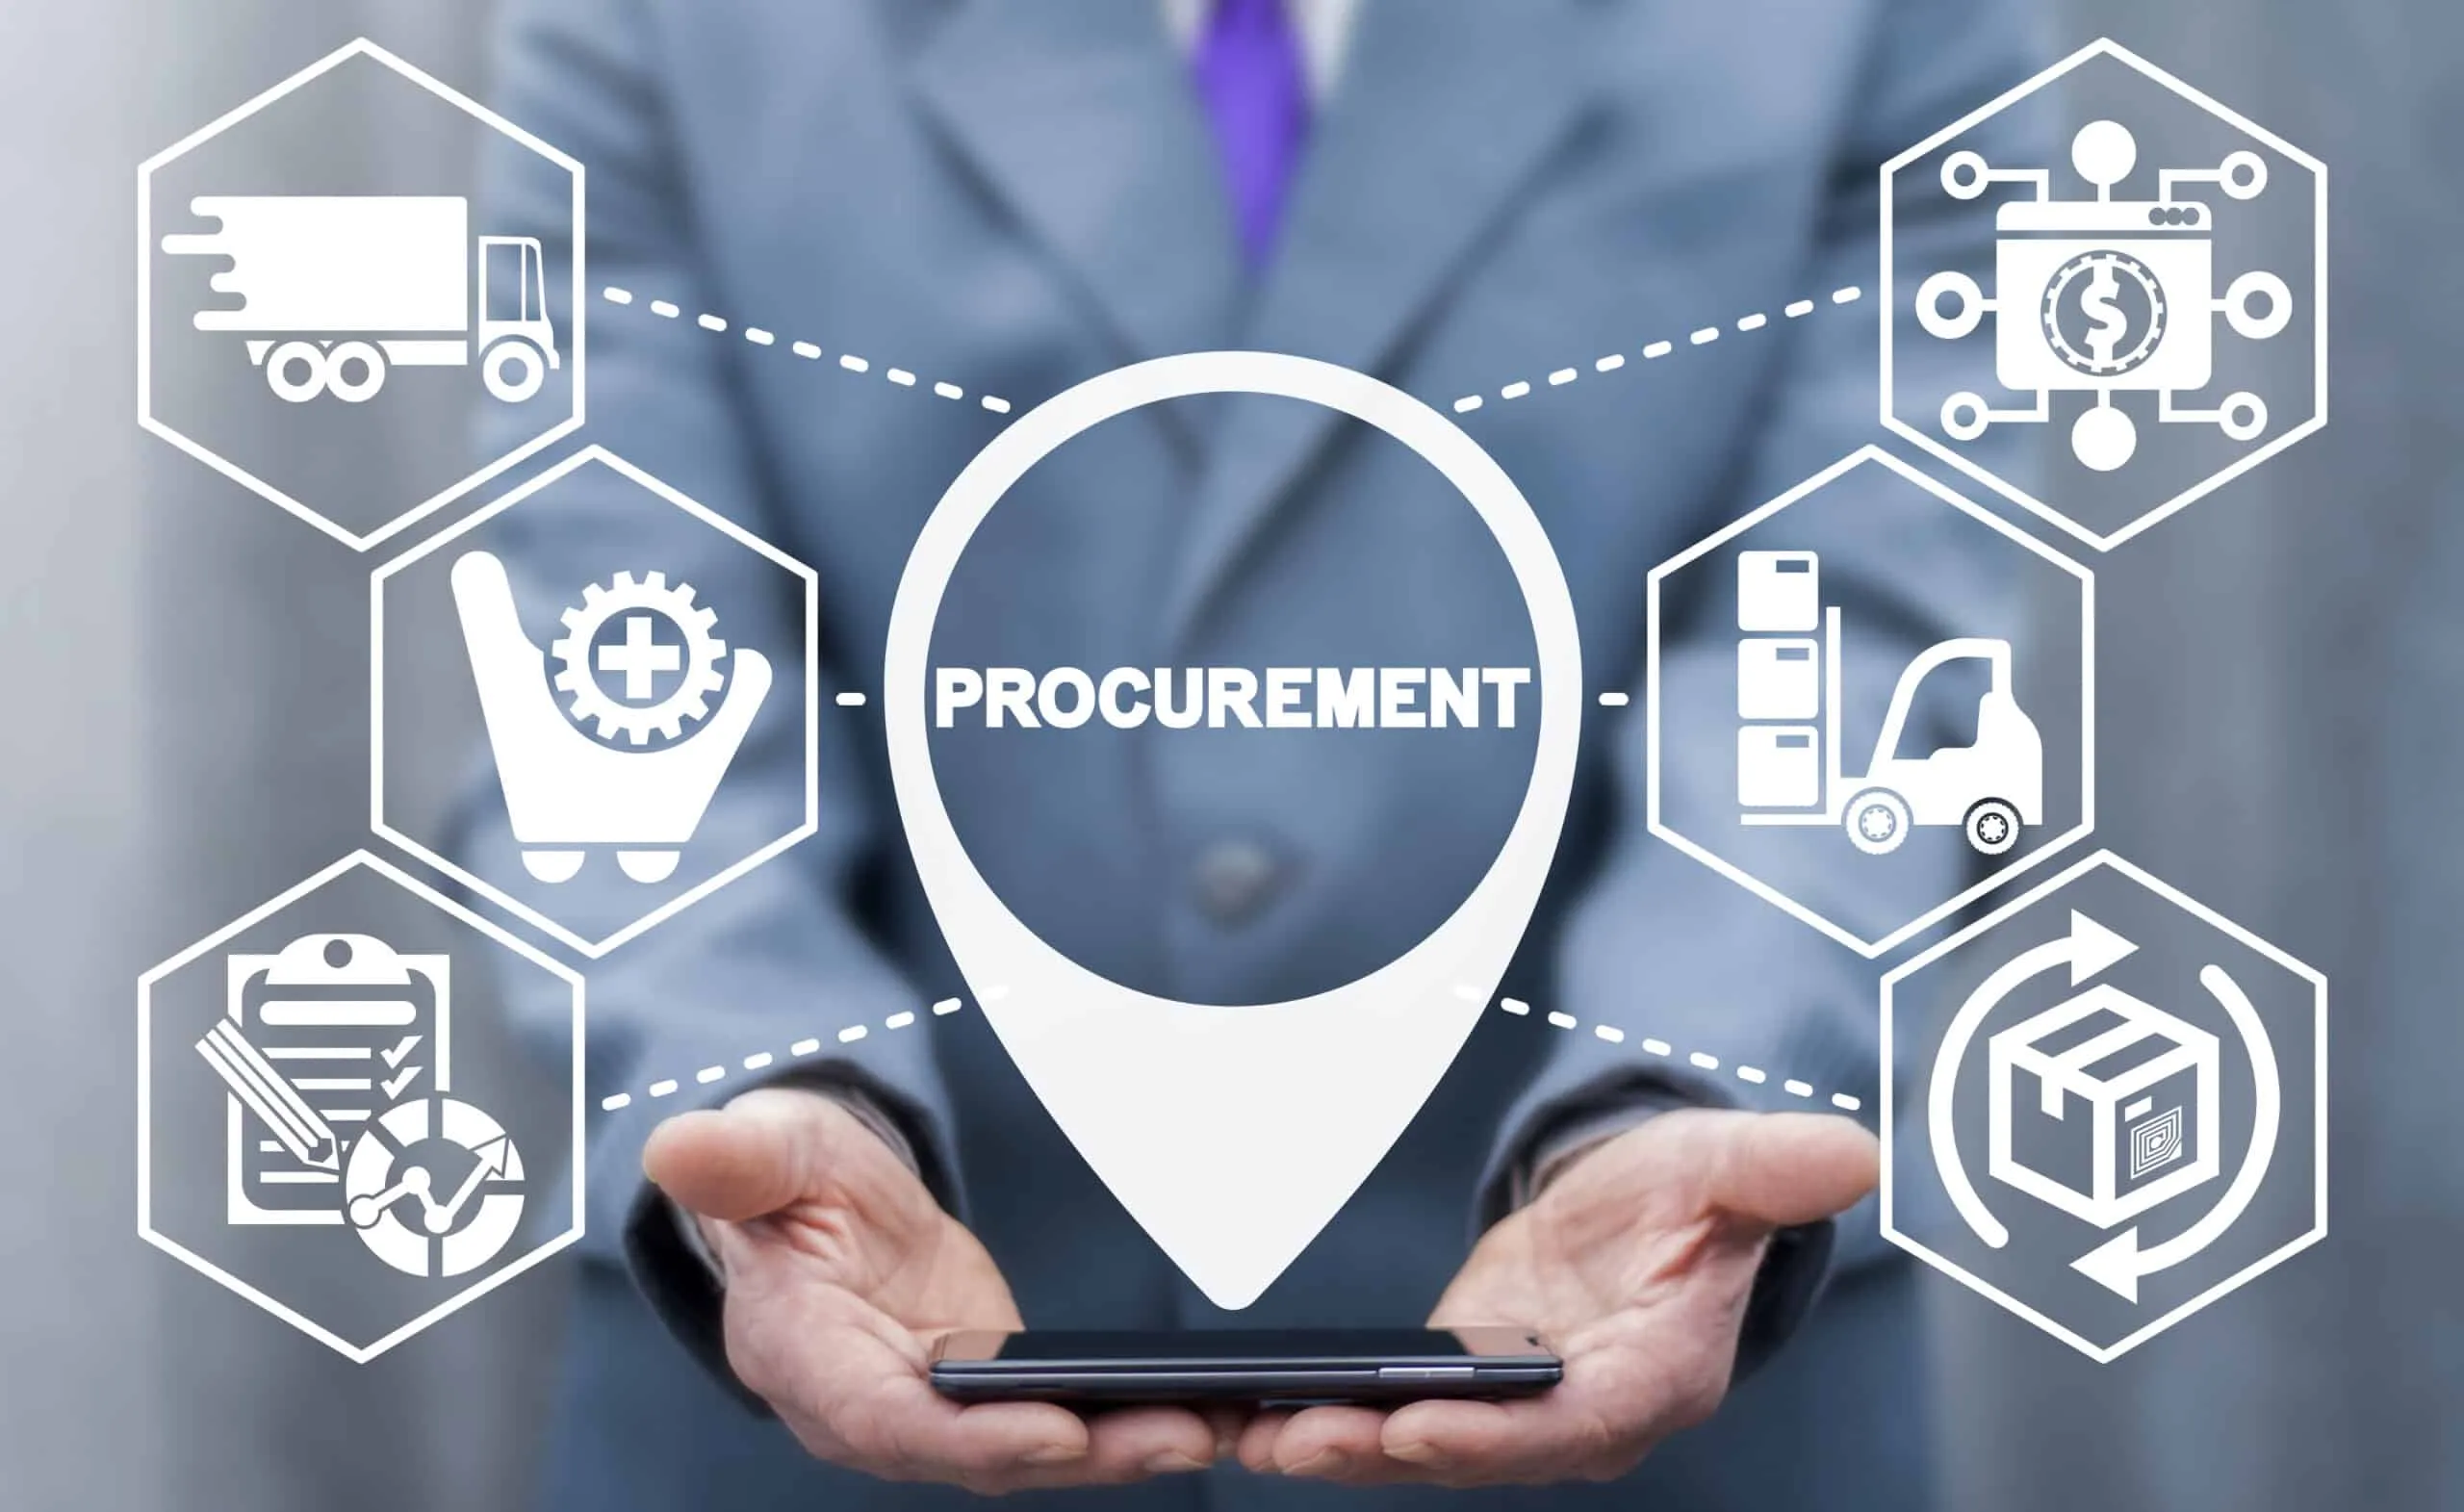 05 cases which are not applicable to procurement